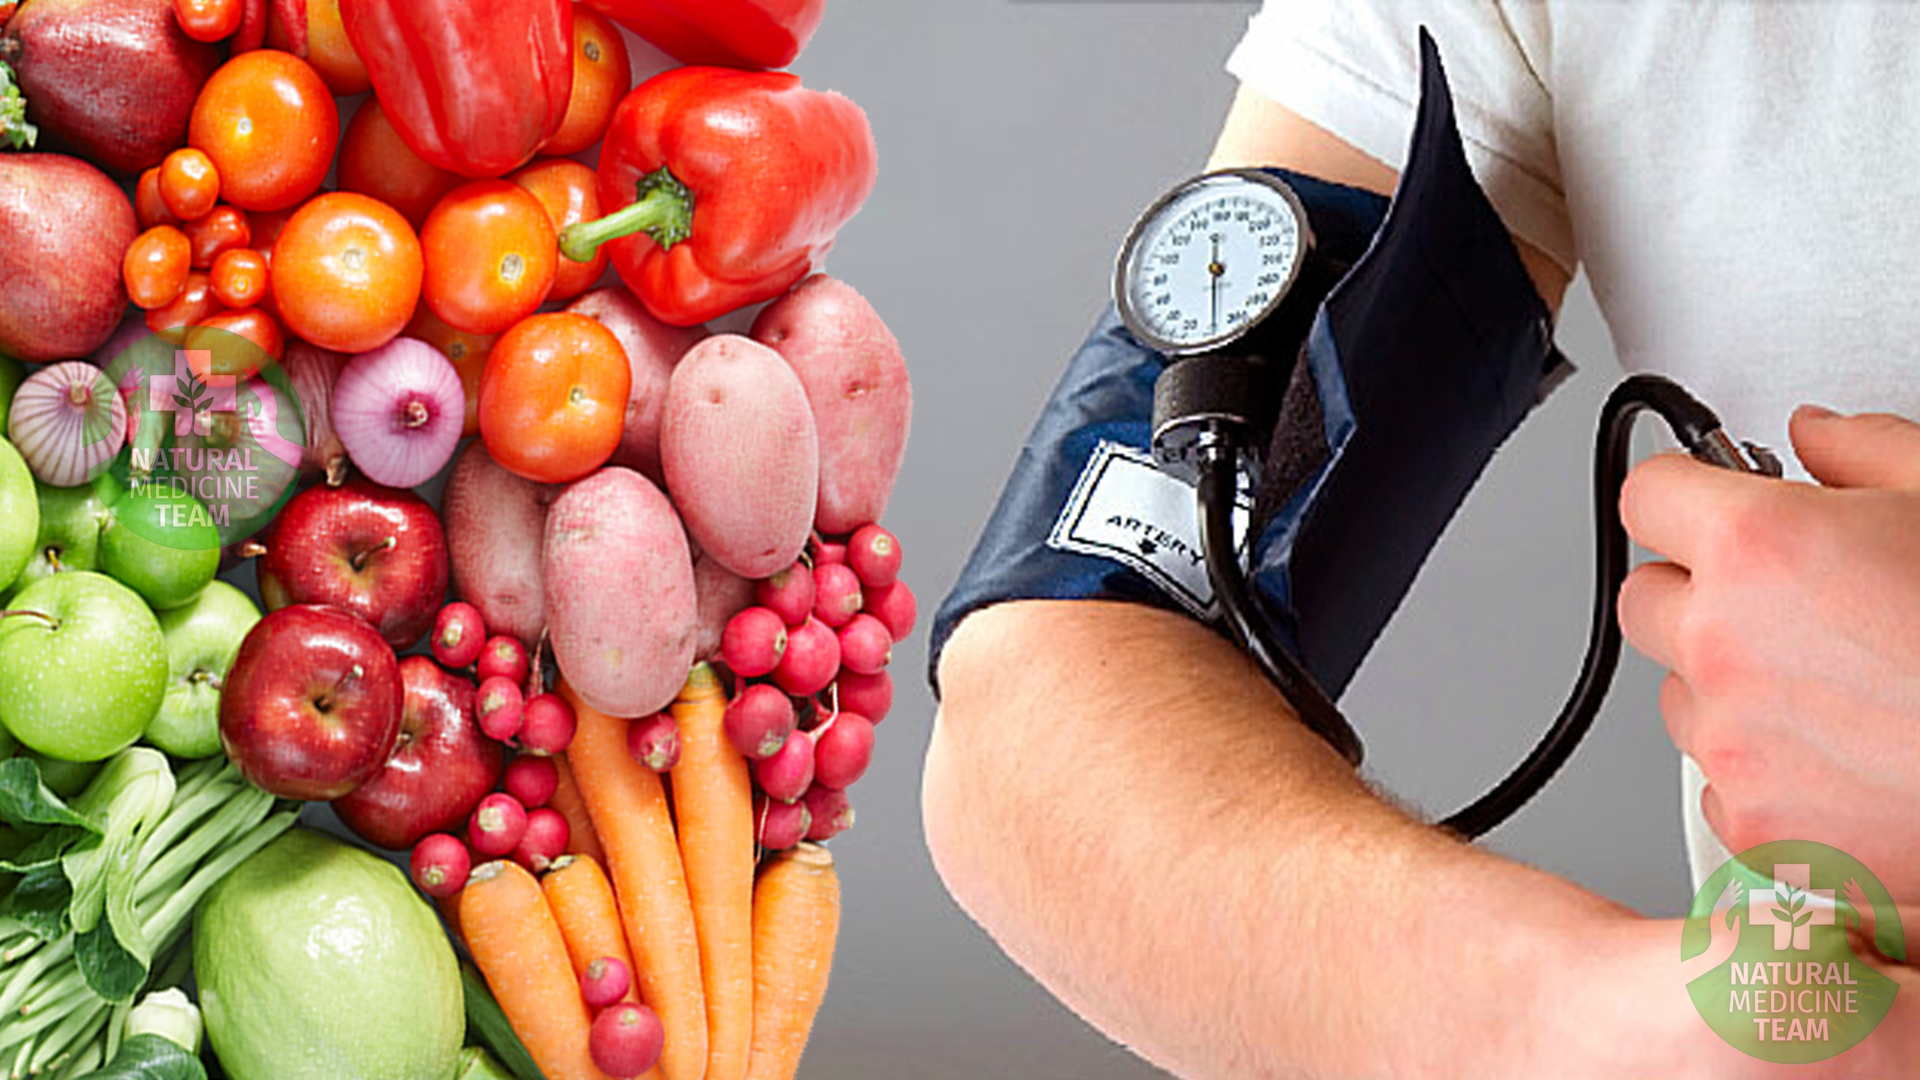 remedies for high blood pressure